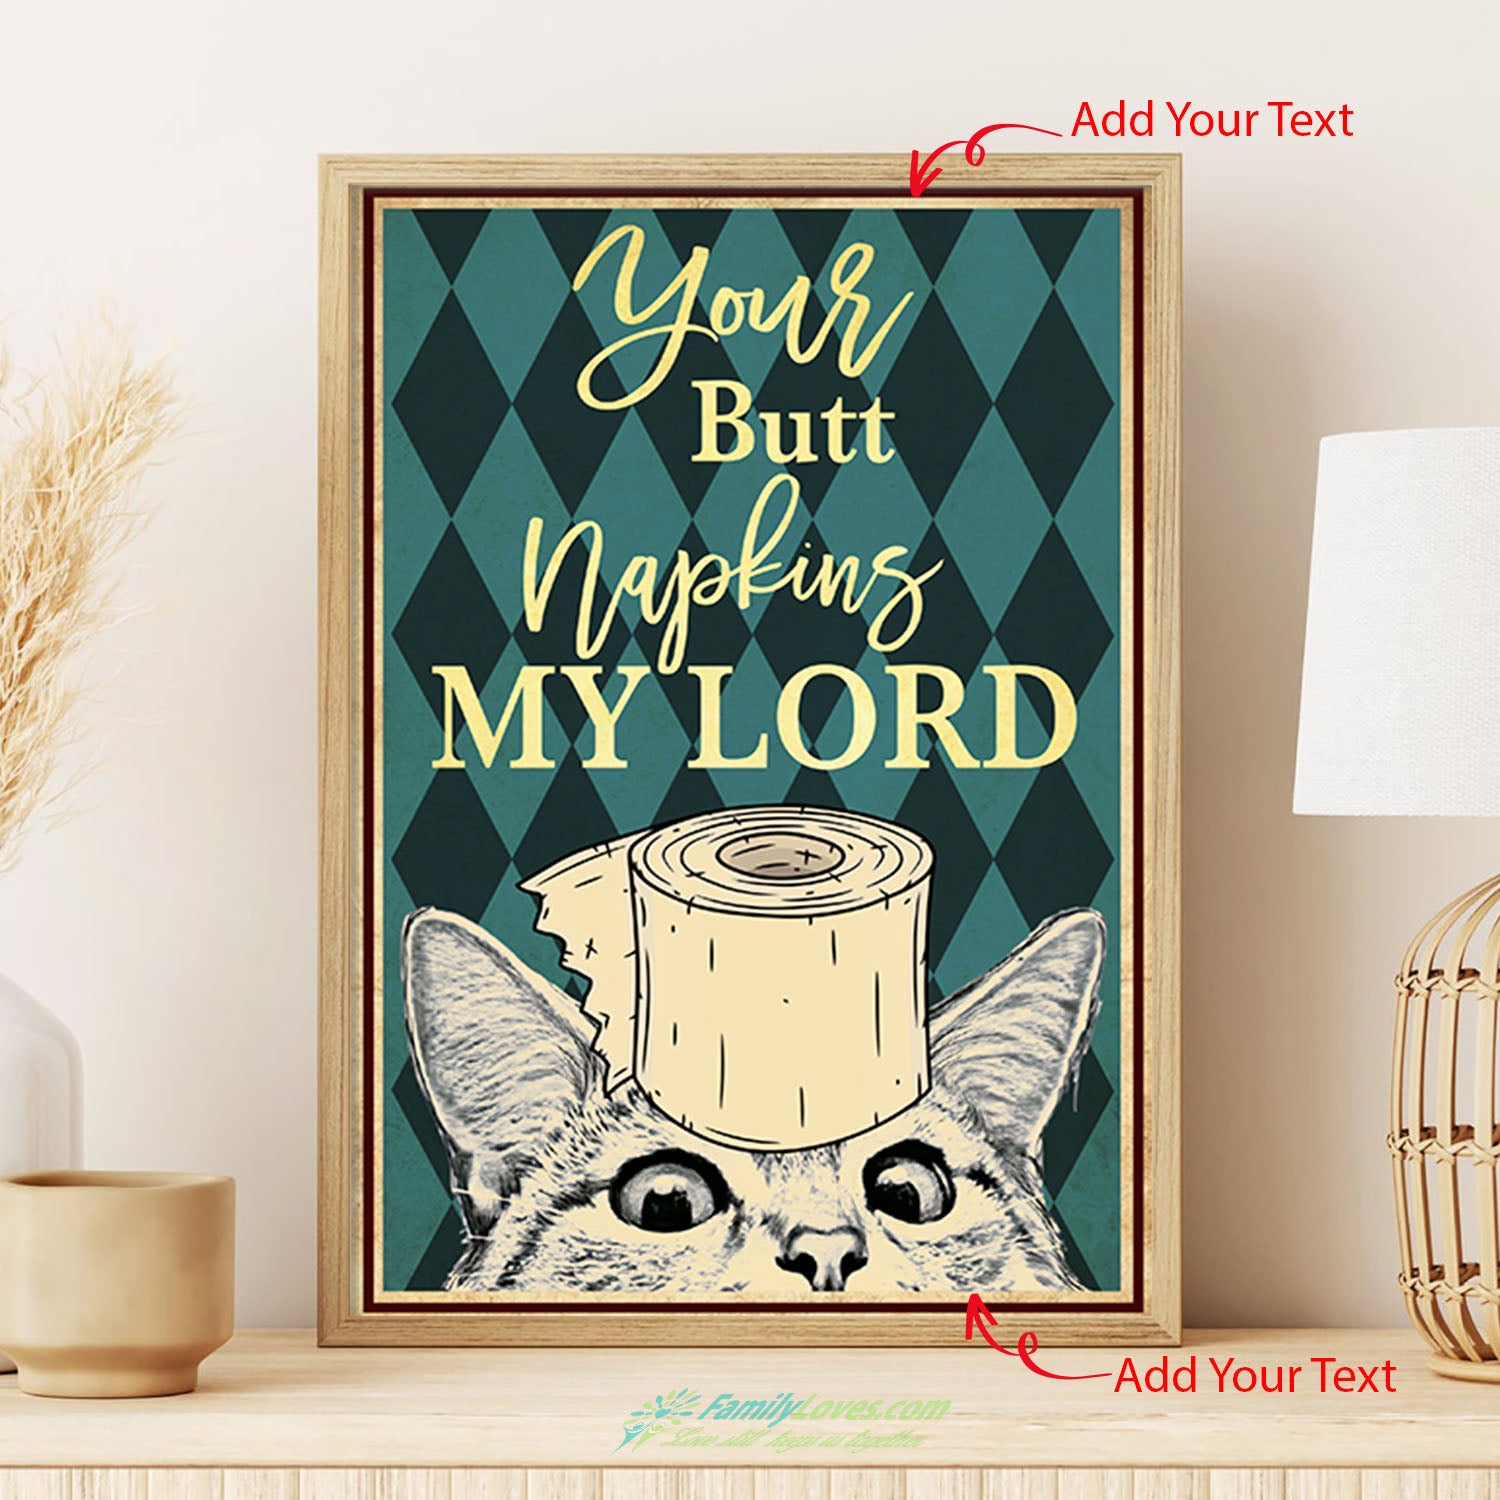 White Cat Your Butt Napkins My Lord Frame For Canvas 16X20 Poster Wall Decor All Size 1